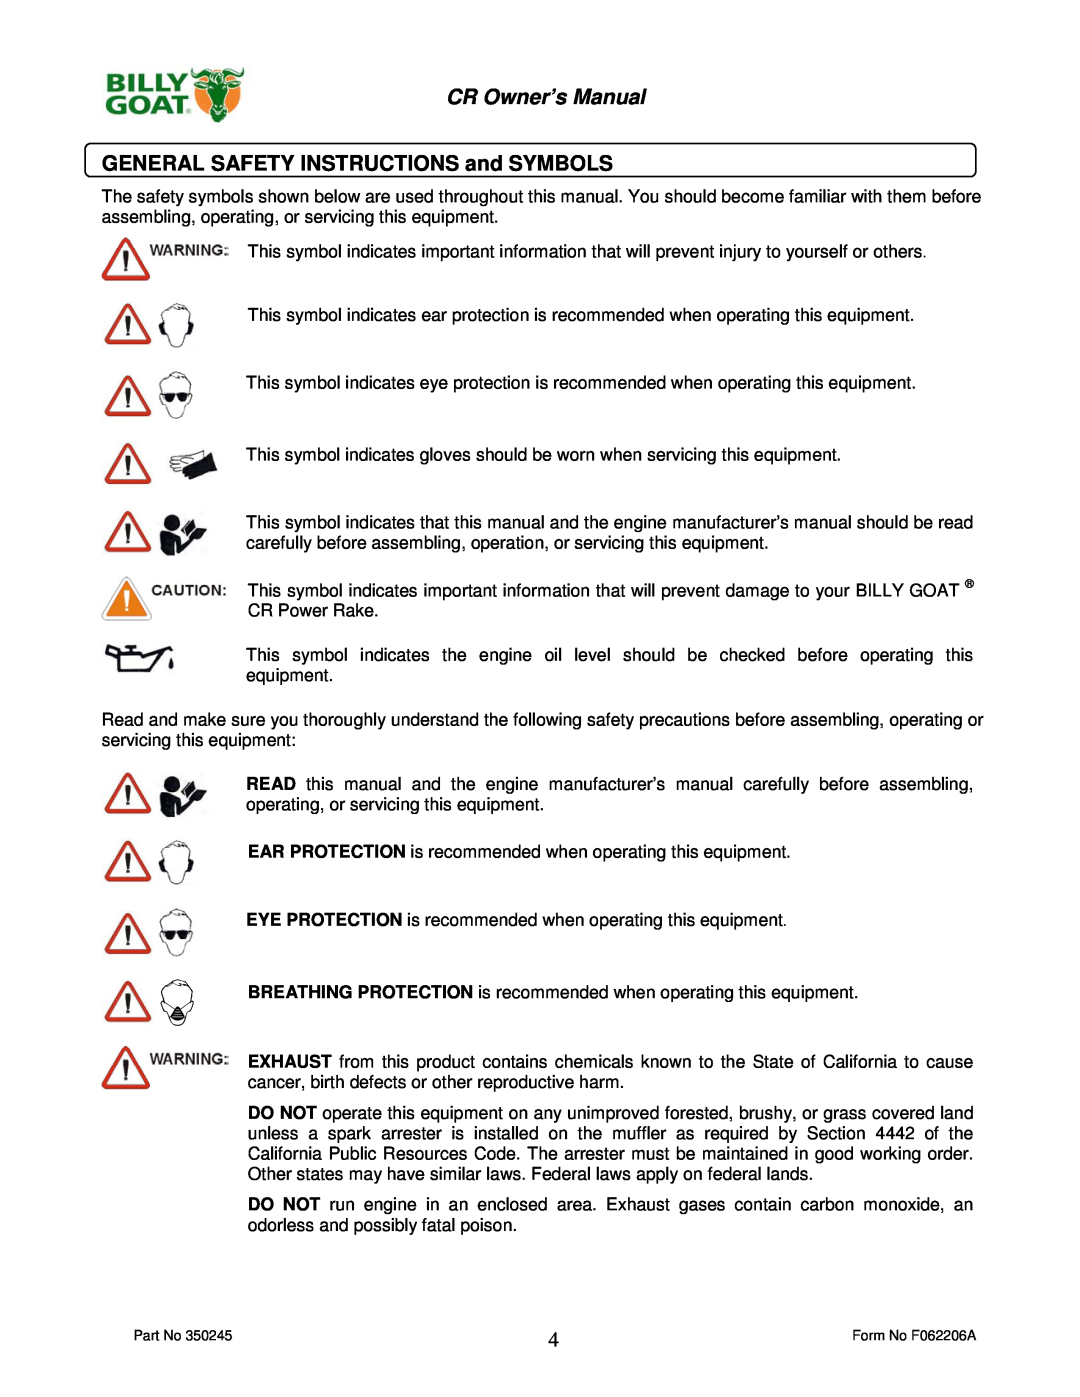 Billy Goat CR550HC owner manual GENERAL SAFETY INSTRUCTIONS and SYMBOLS 